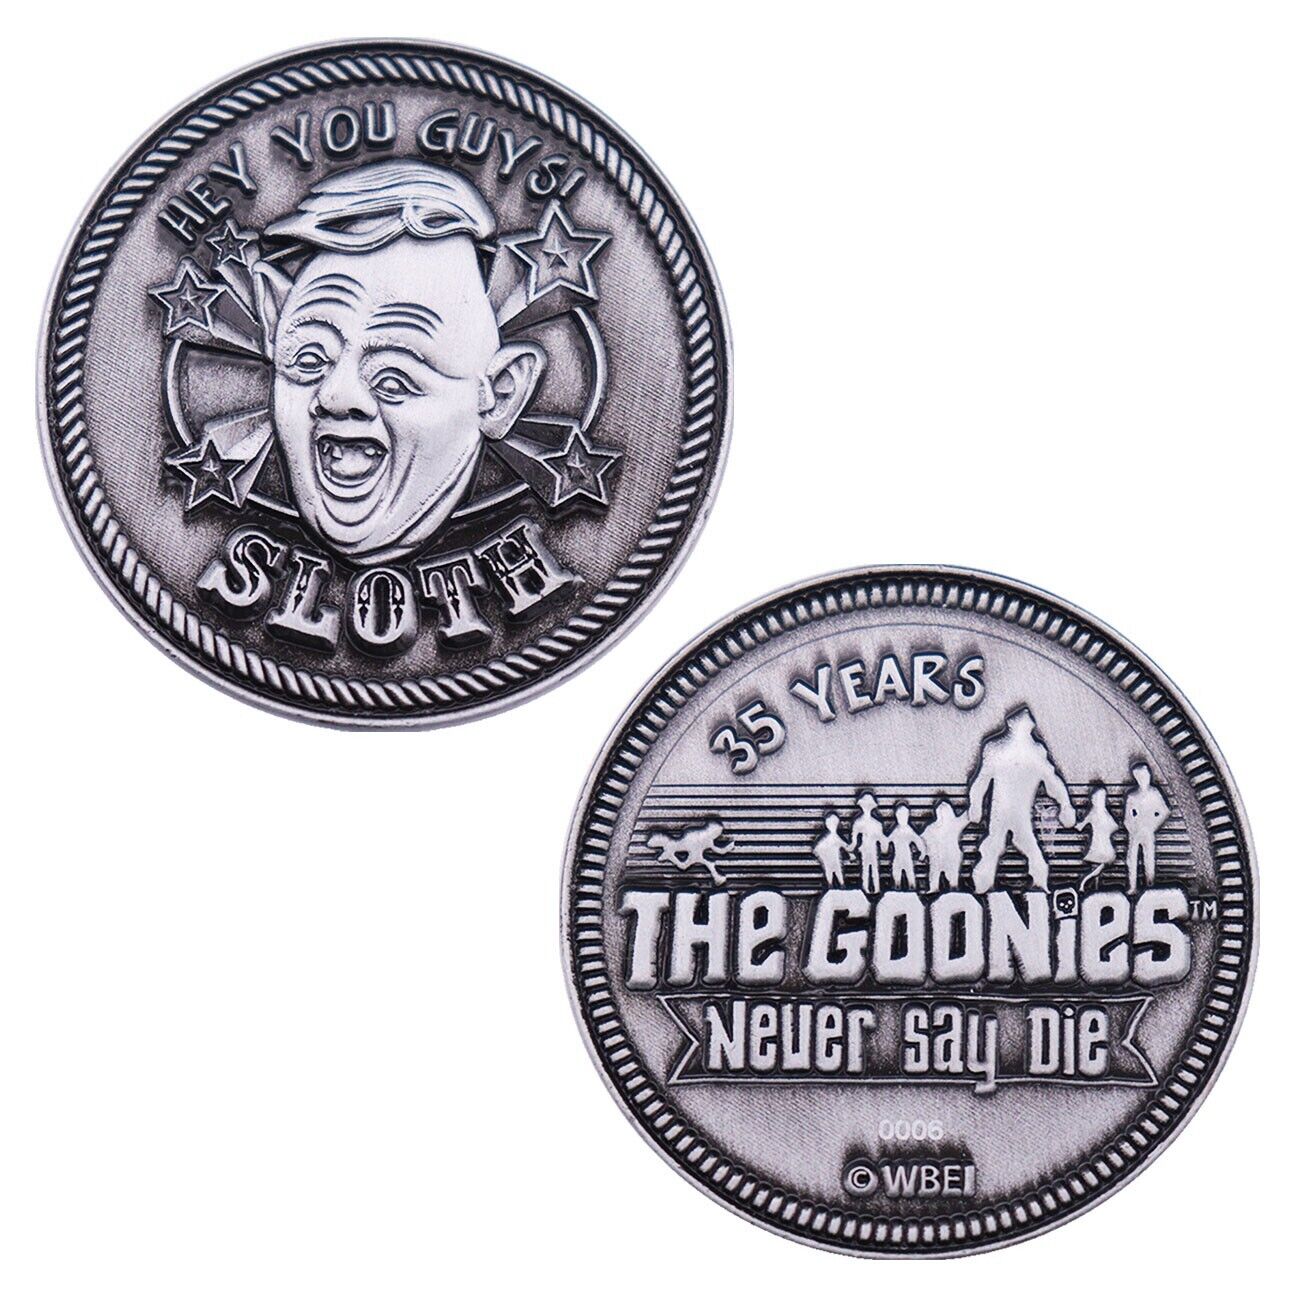 The Goonies 35th Anniversary Limited Edition Collectable Coin Fanattik